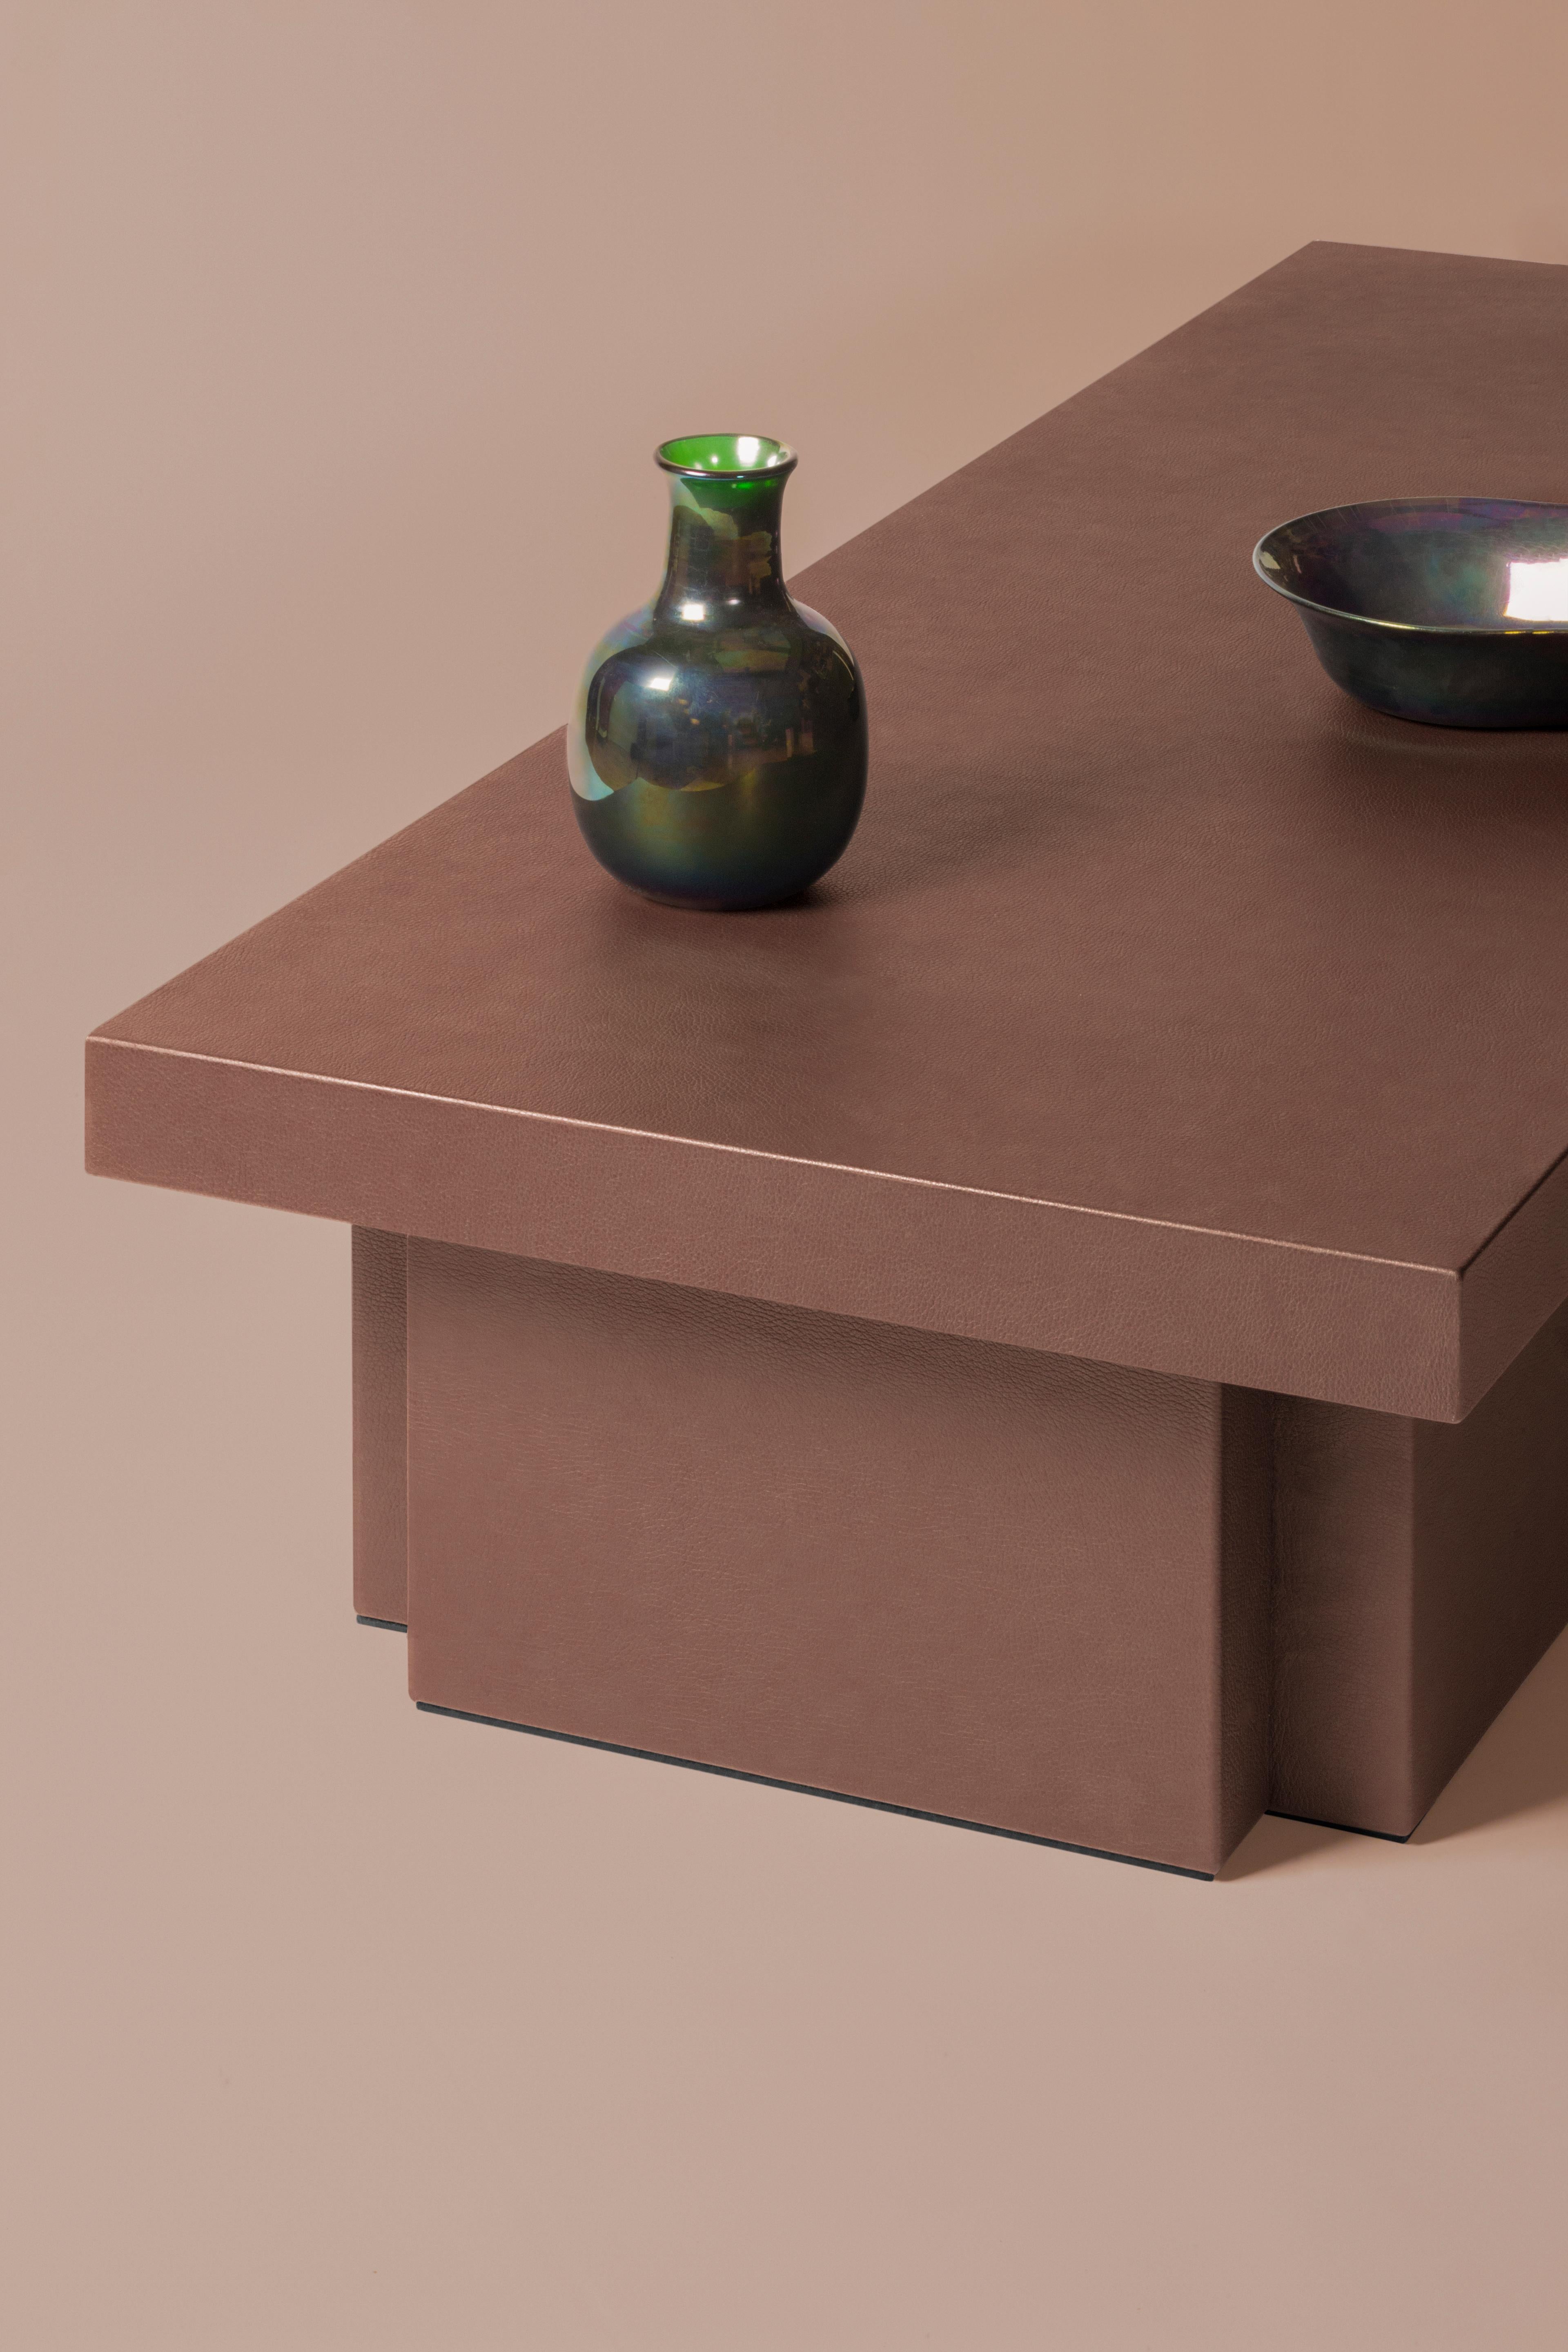 Assoluto Coffee Table -- Francesco Balzano x Giobagnara

Available in printed calfskin, suede, nappa finish. Pictured here is the table in H30 printed calfskin deer tobacco finish.

For simple and sophisticated leather and marble products, look no